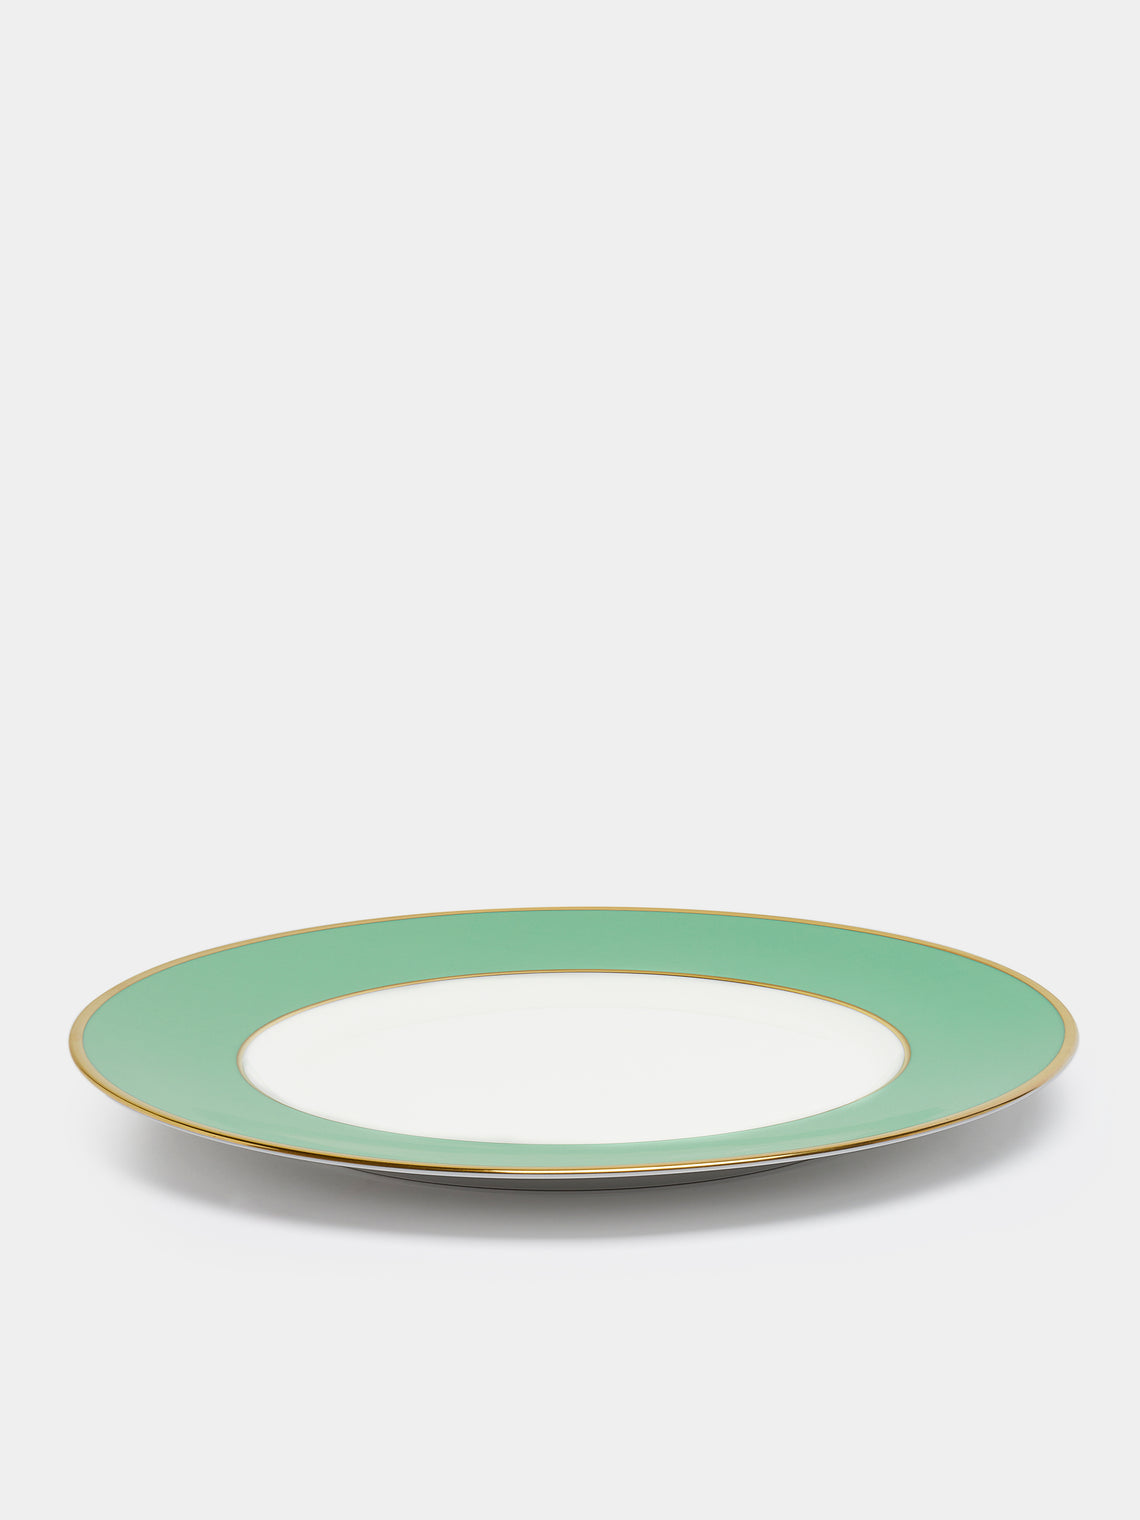 Augarten - Hand-Painted Porcelain Charger Plate - Green - ABASK